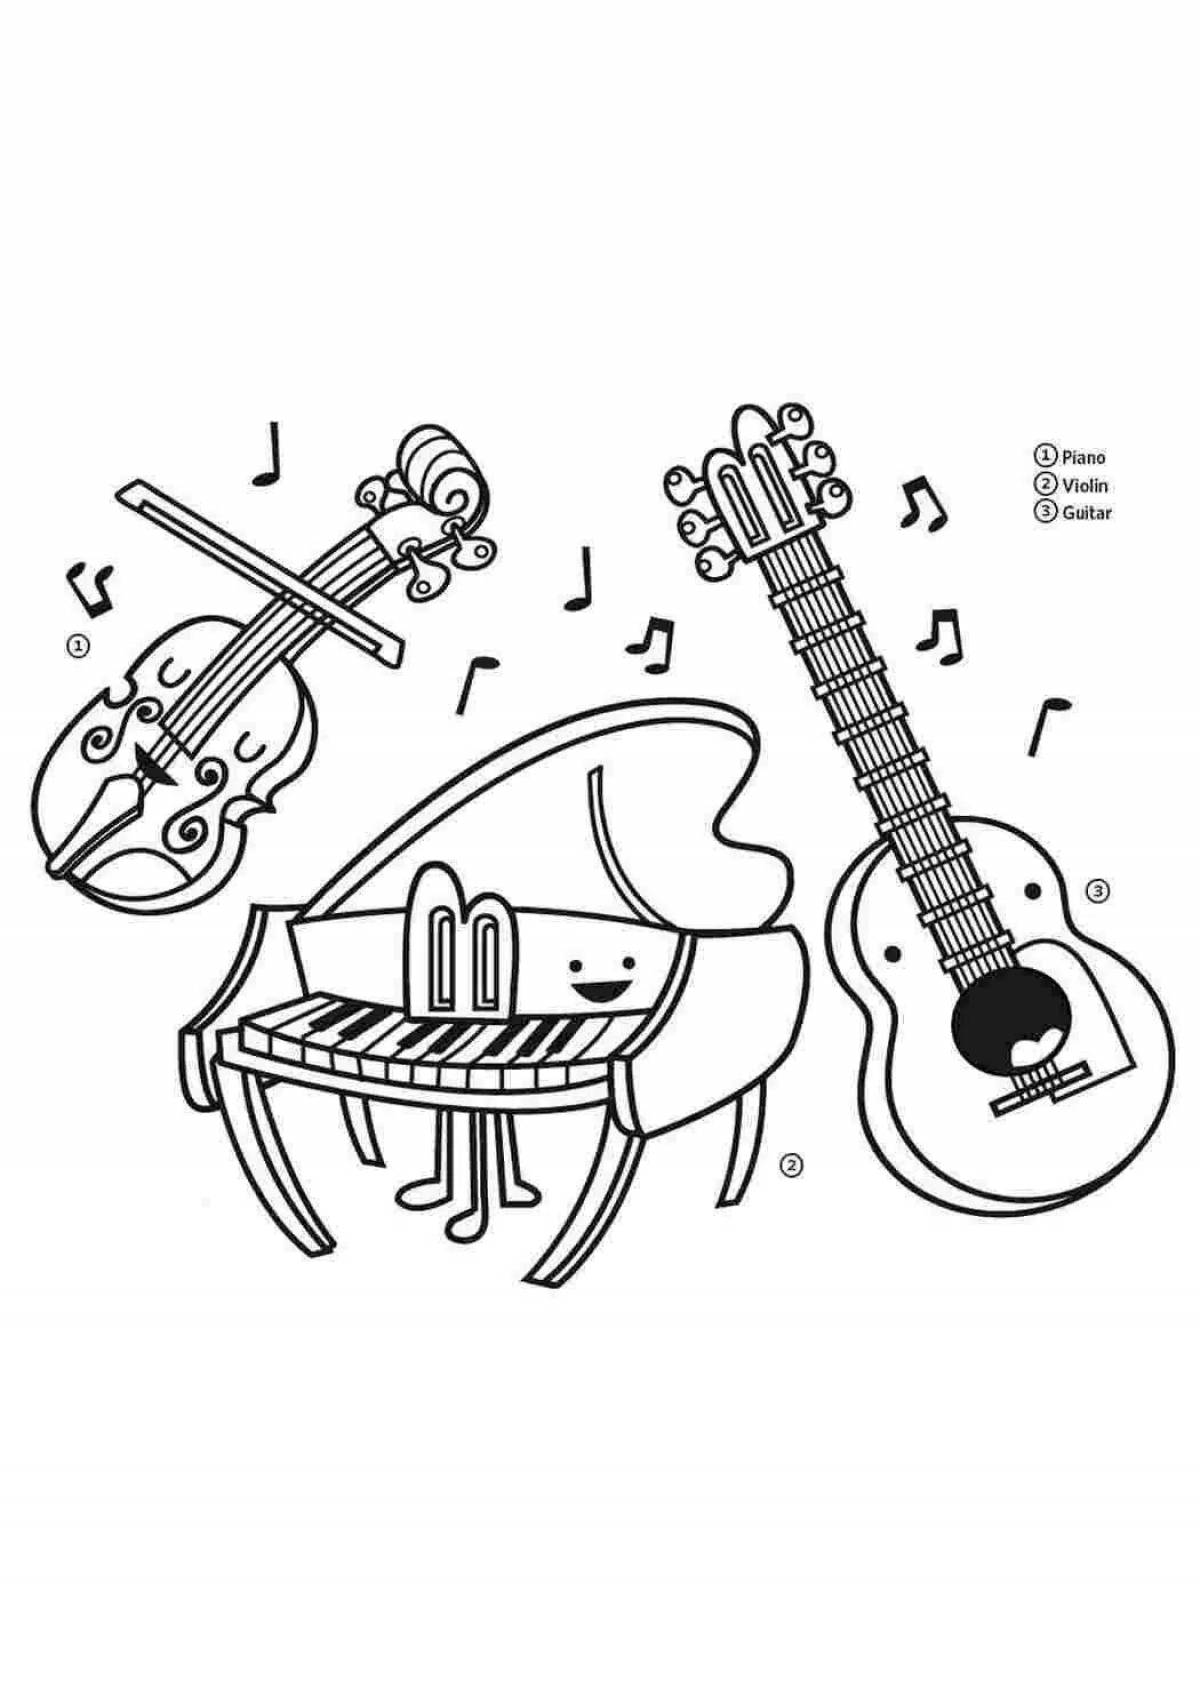 Coloring page joyful musical instruments